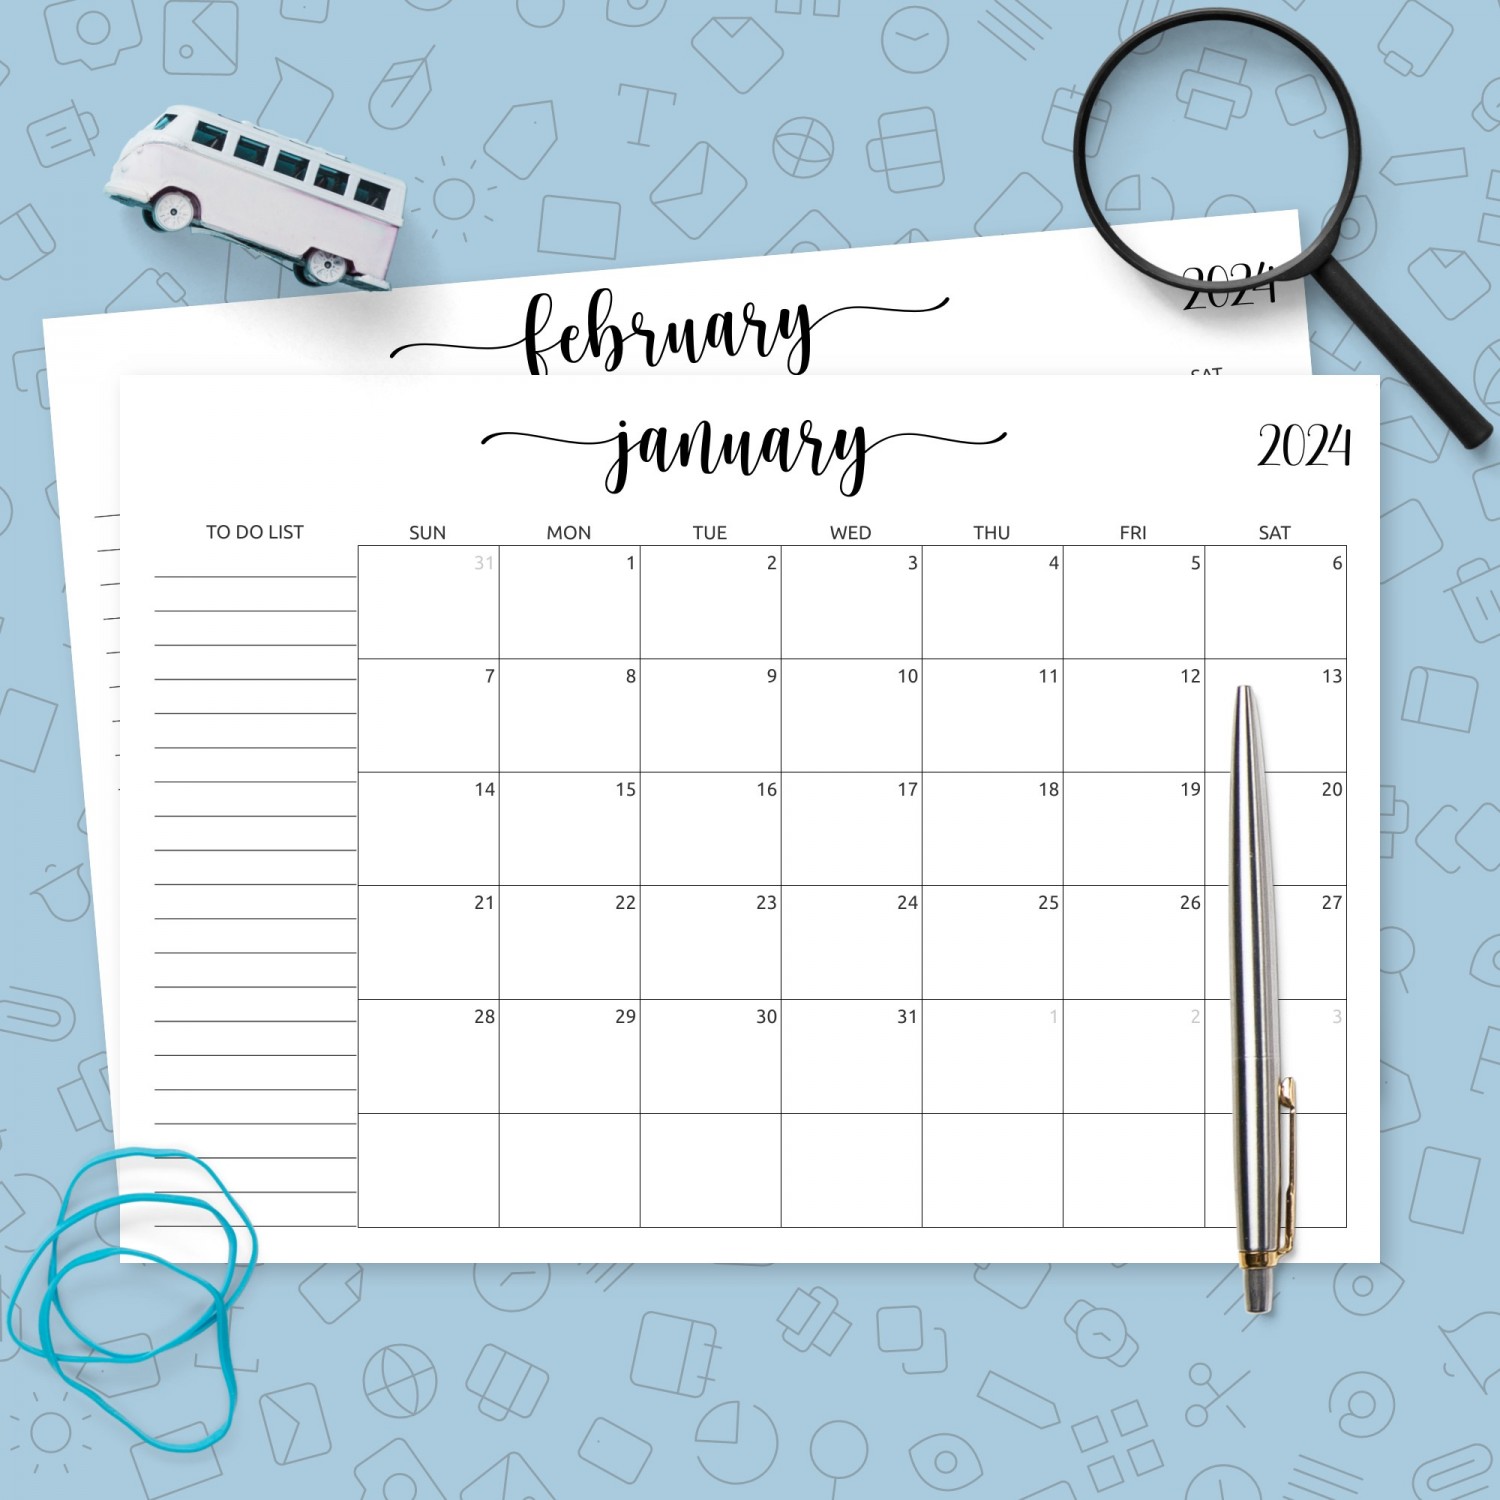 Monthly Calendar with To-Do List Template - Printable PDF